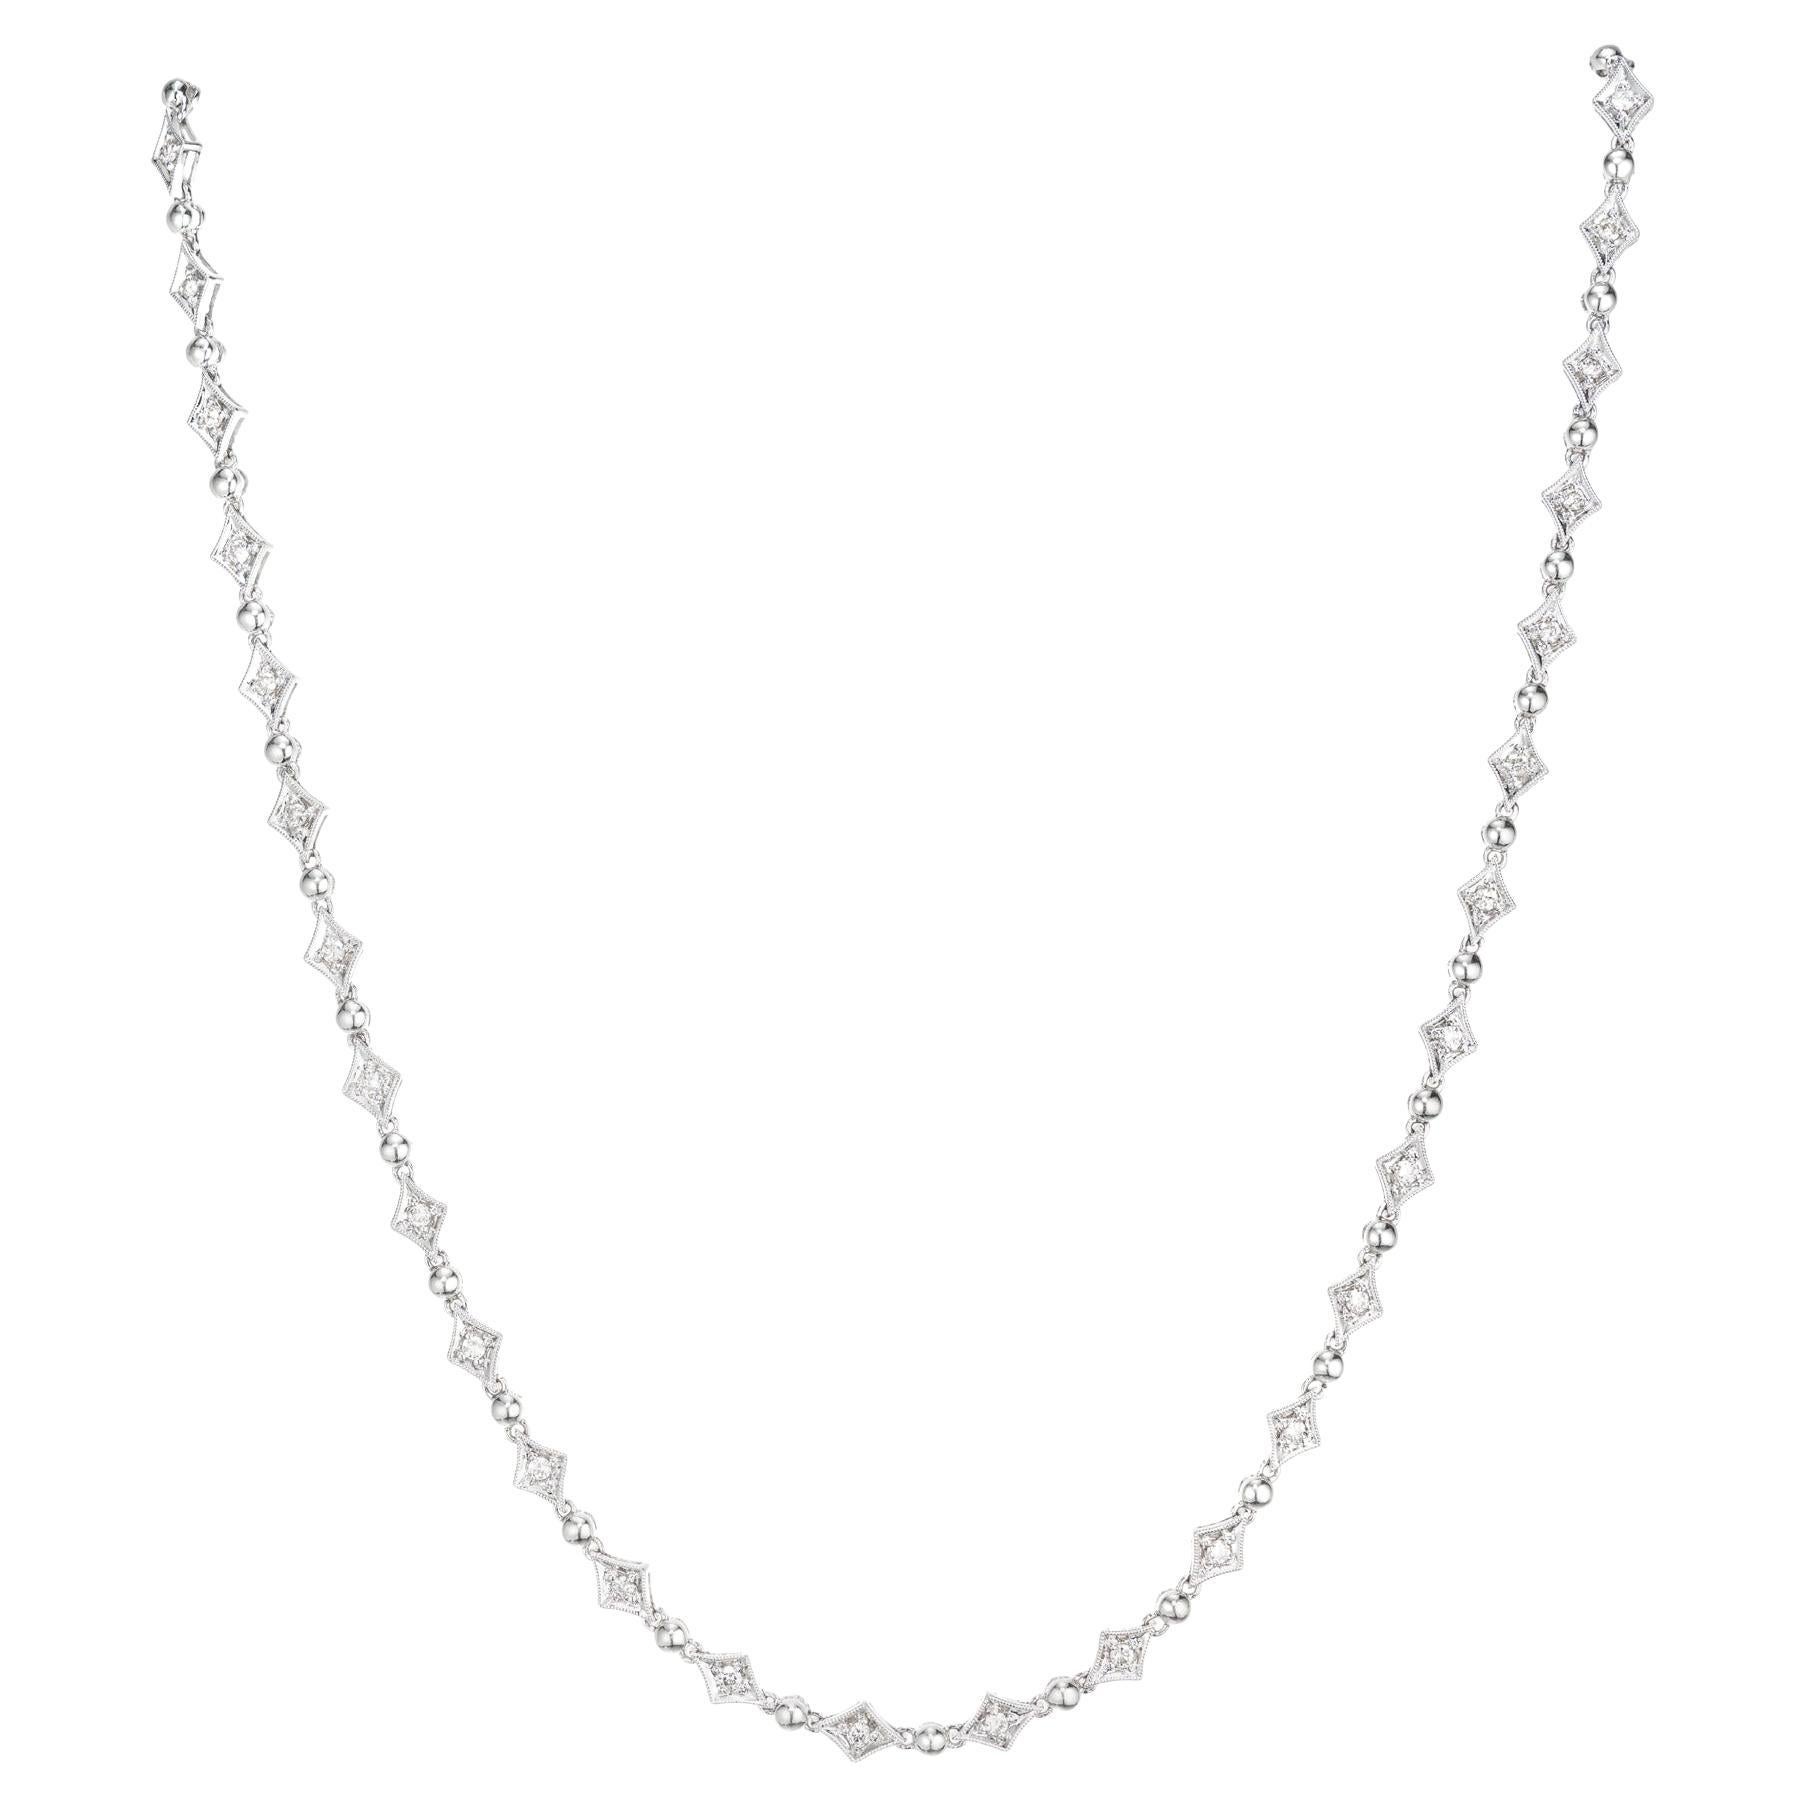 1.11 Carat Diamond Marquise Mid-Century Hinged Link Gold Necklace